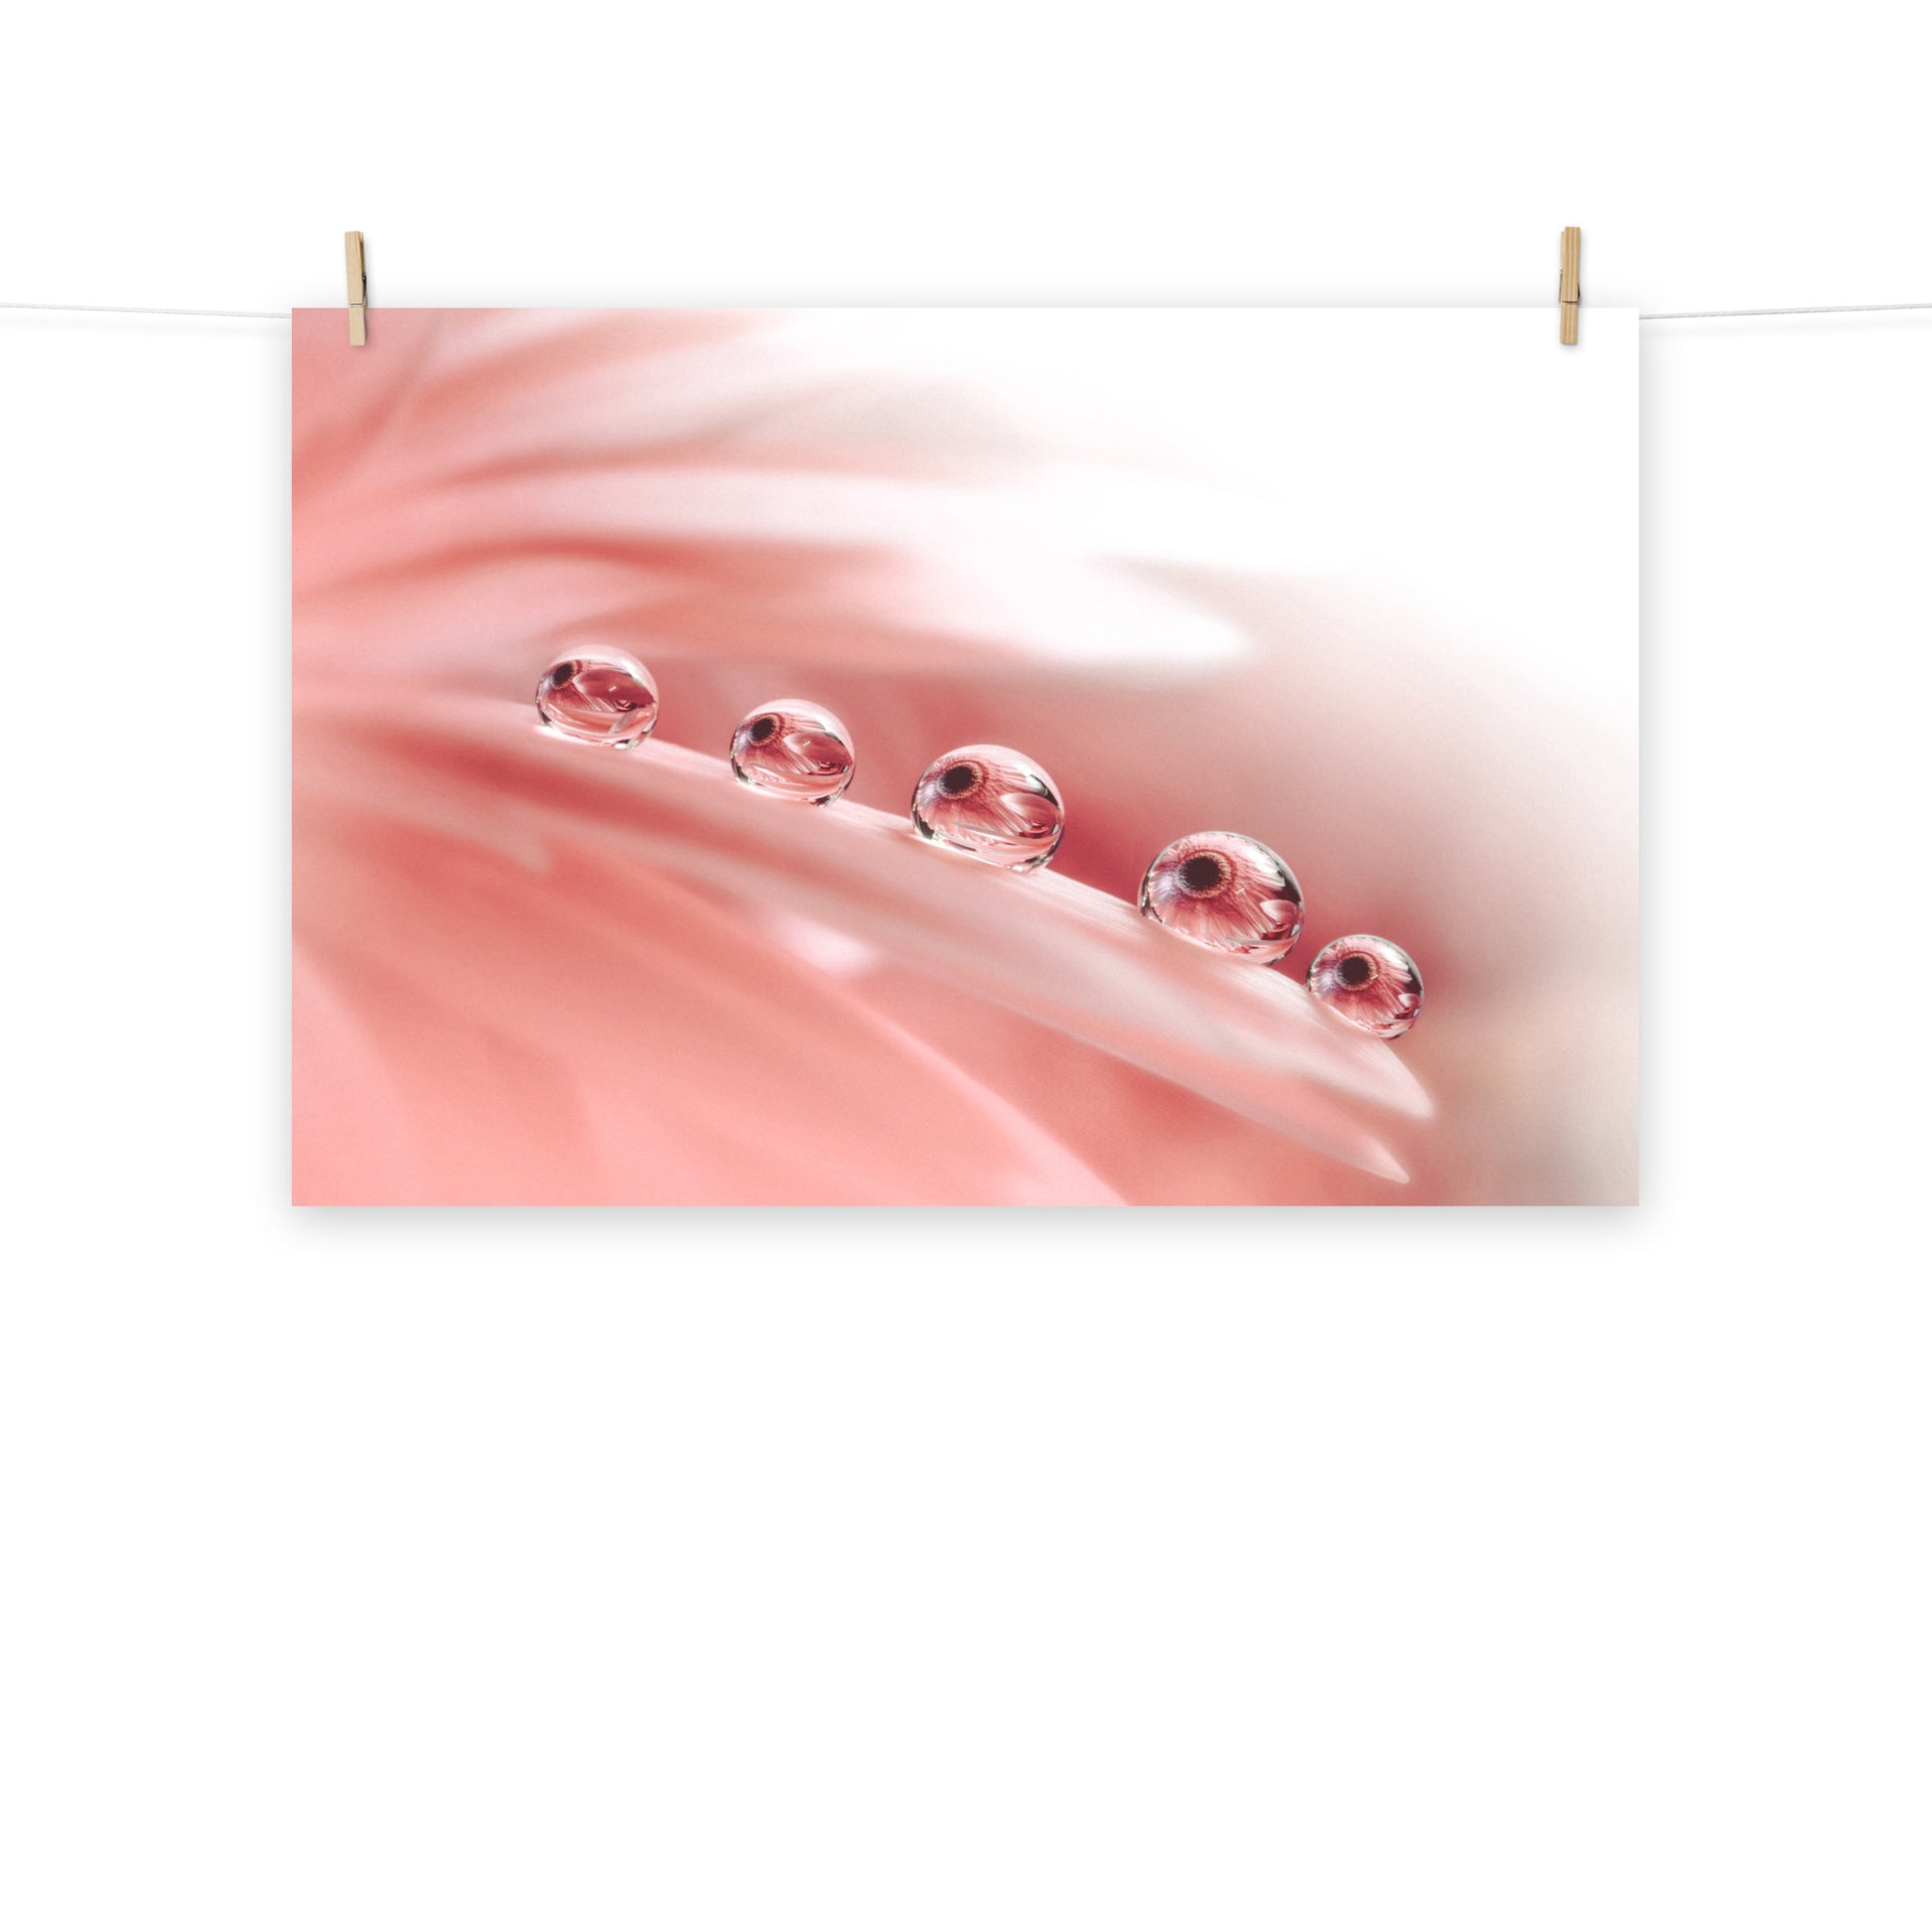 Pink Flower Poster: Peace - Dew Drops on Gerbera Daisy Petals Floral Botanical Photograph Shabby Chic - Vintage Loose / Unframed Wall Art Print